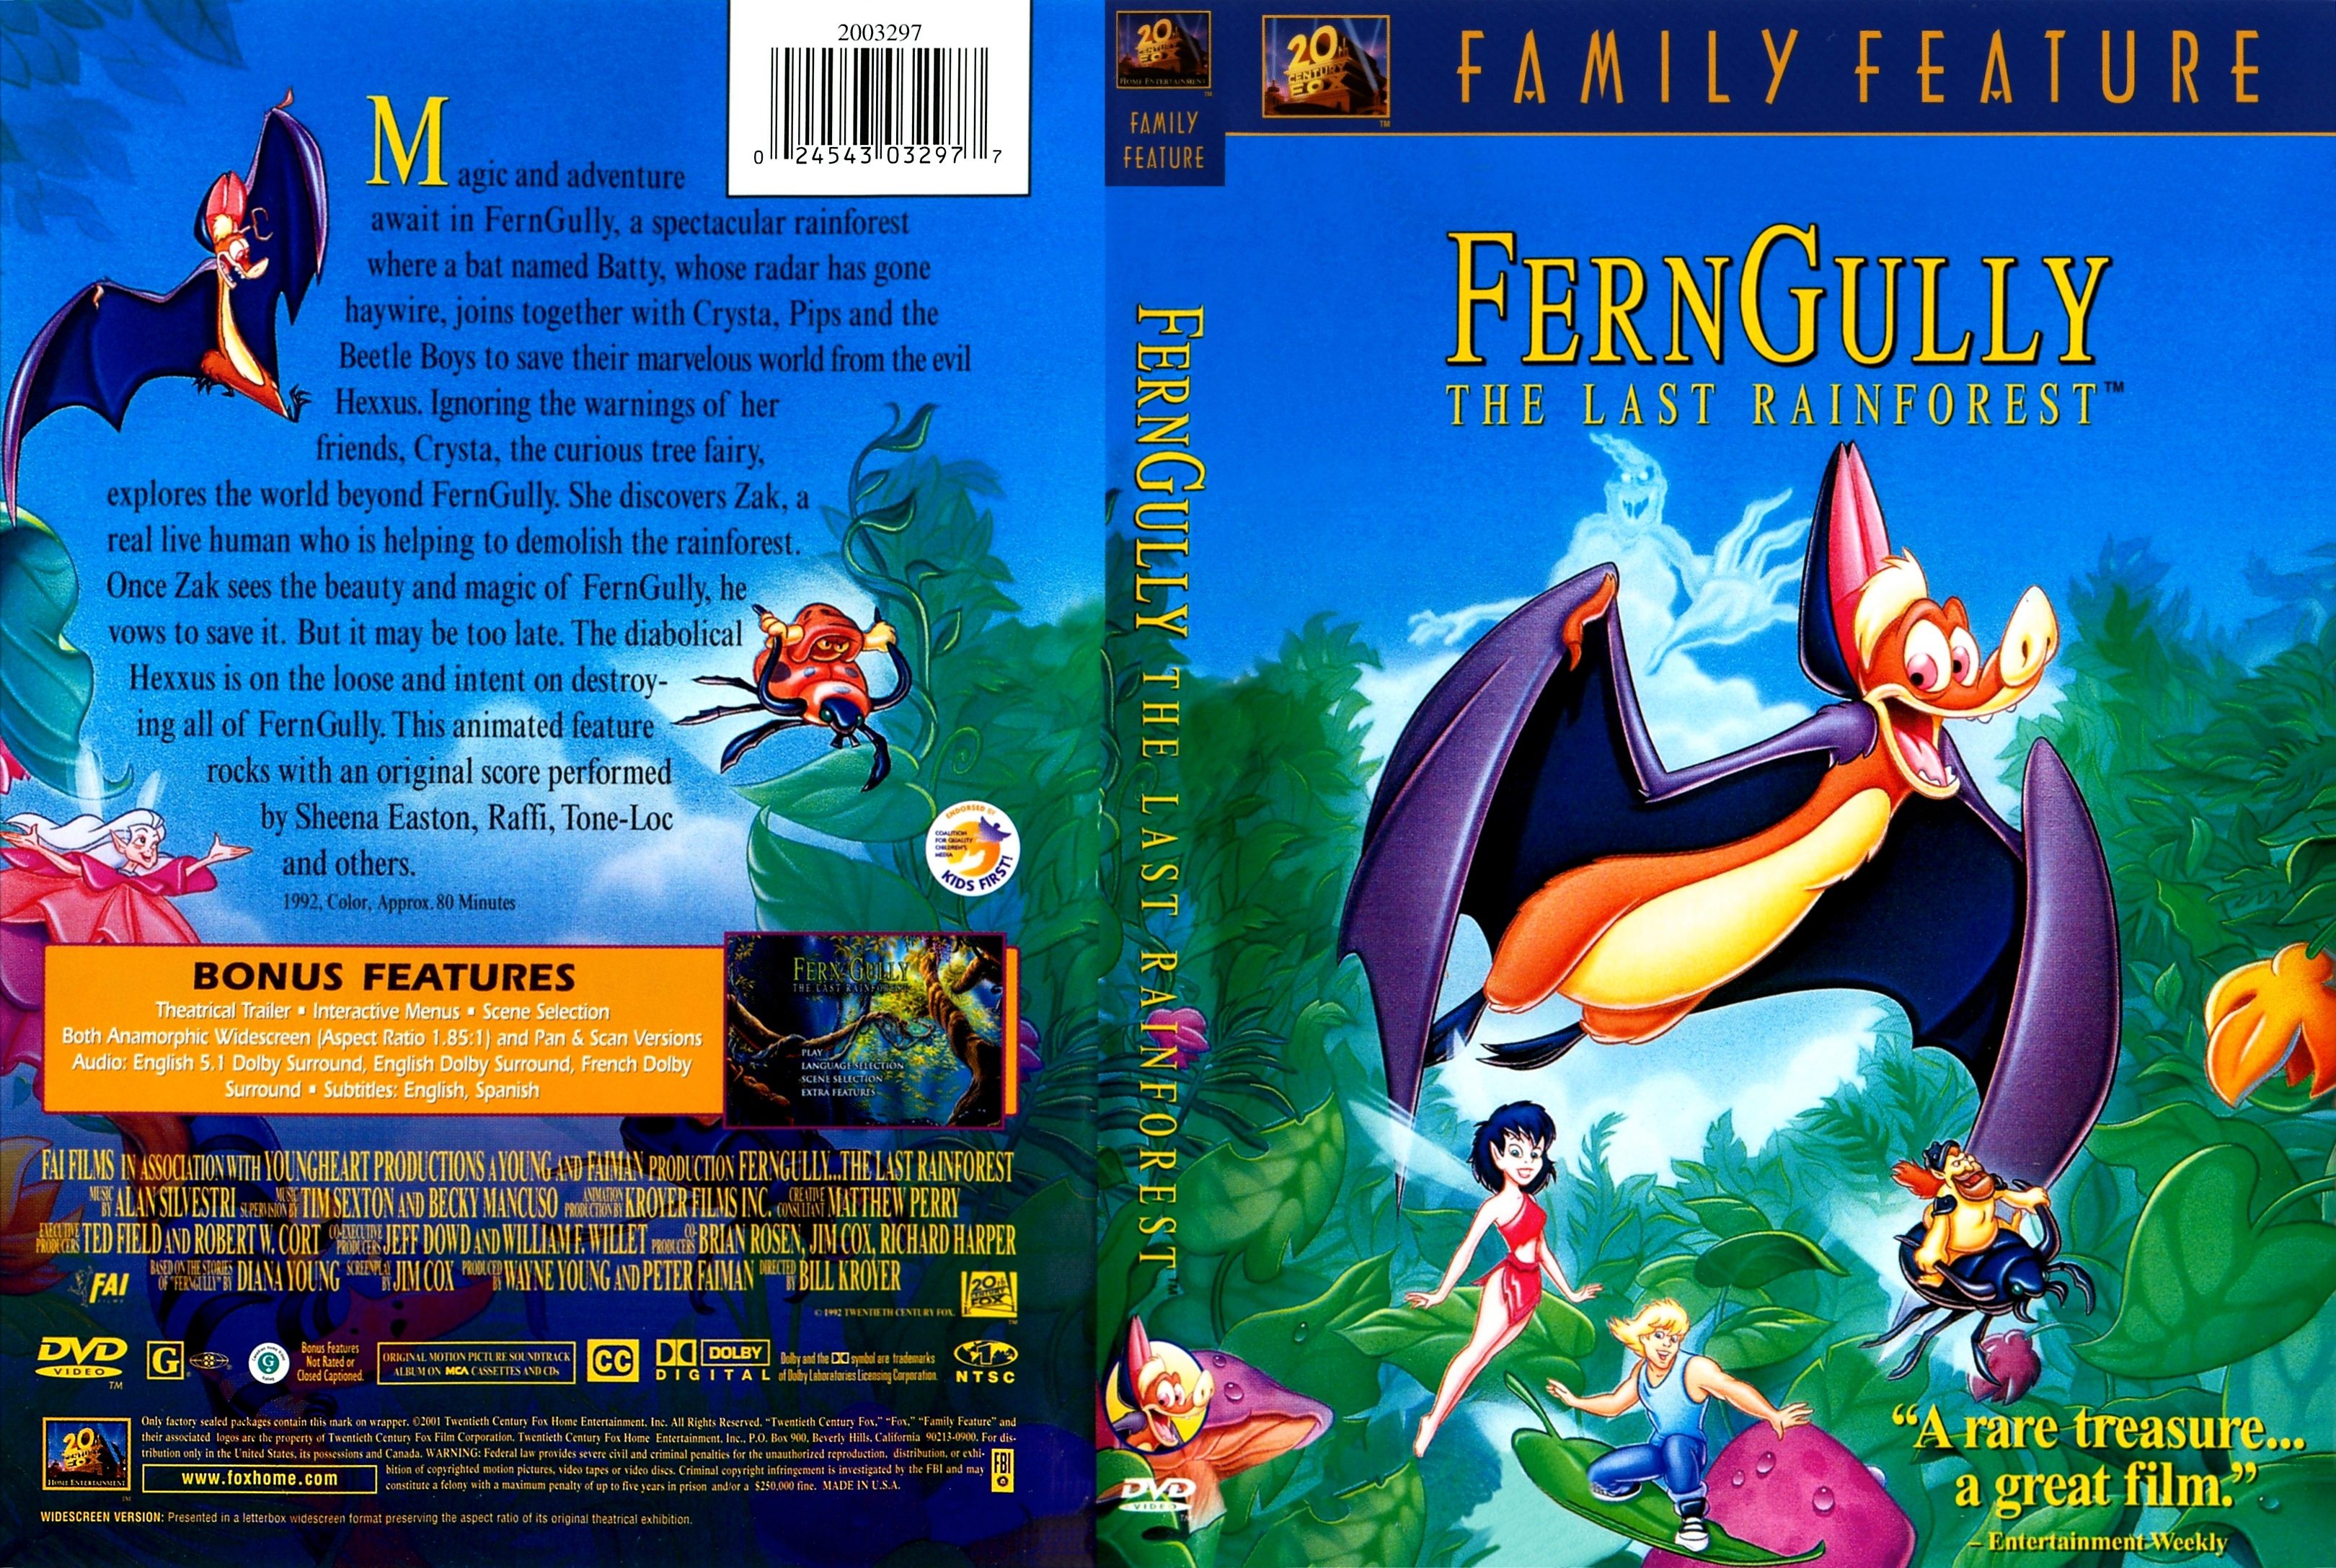 Ferngully: The Last Rainforest #17